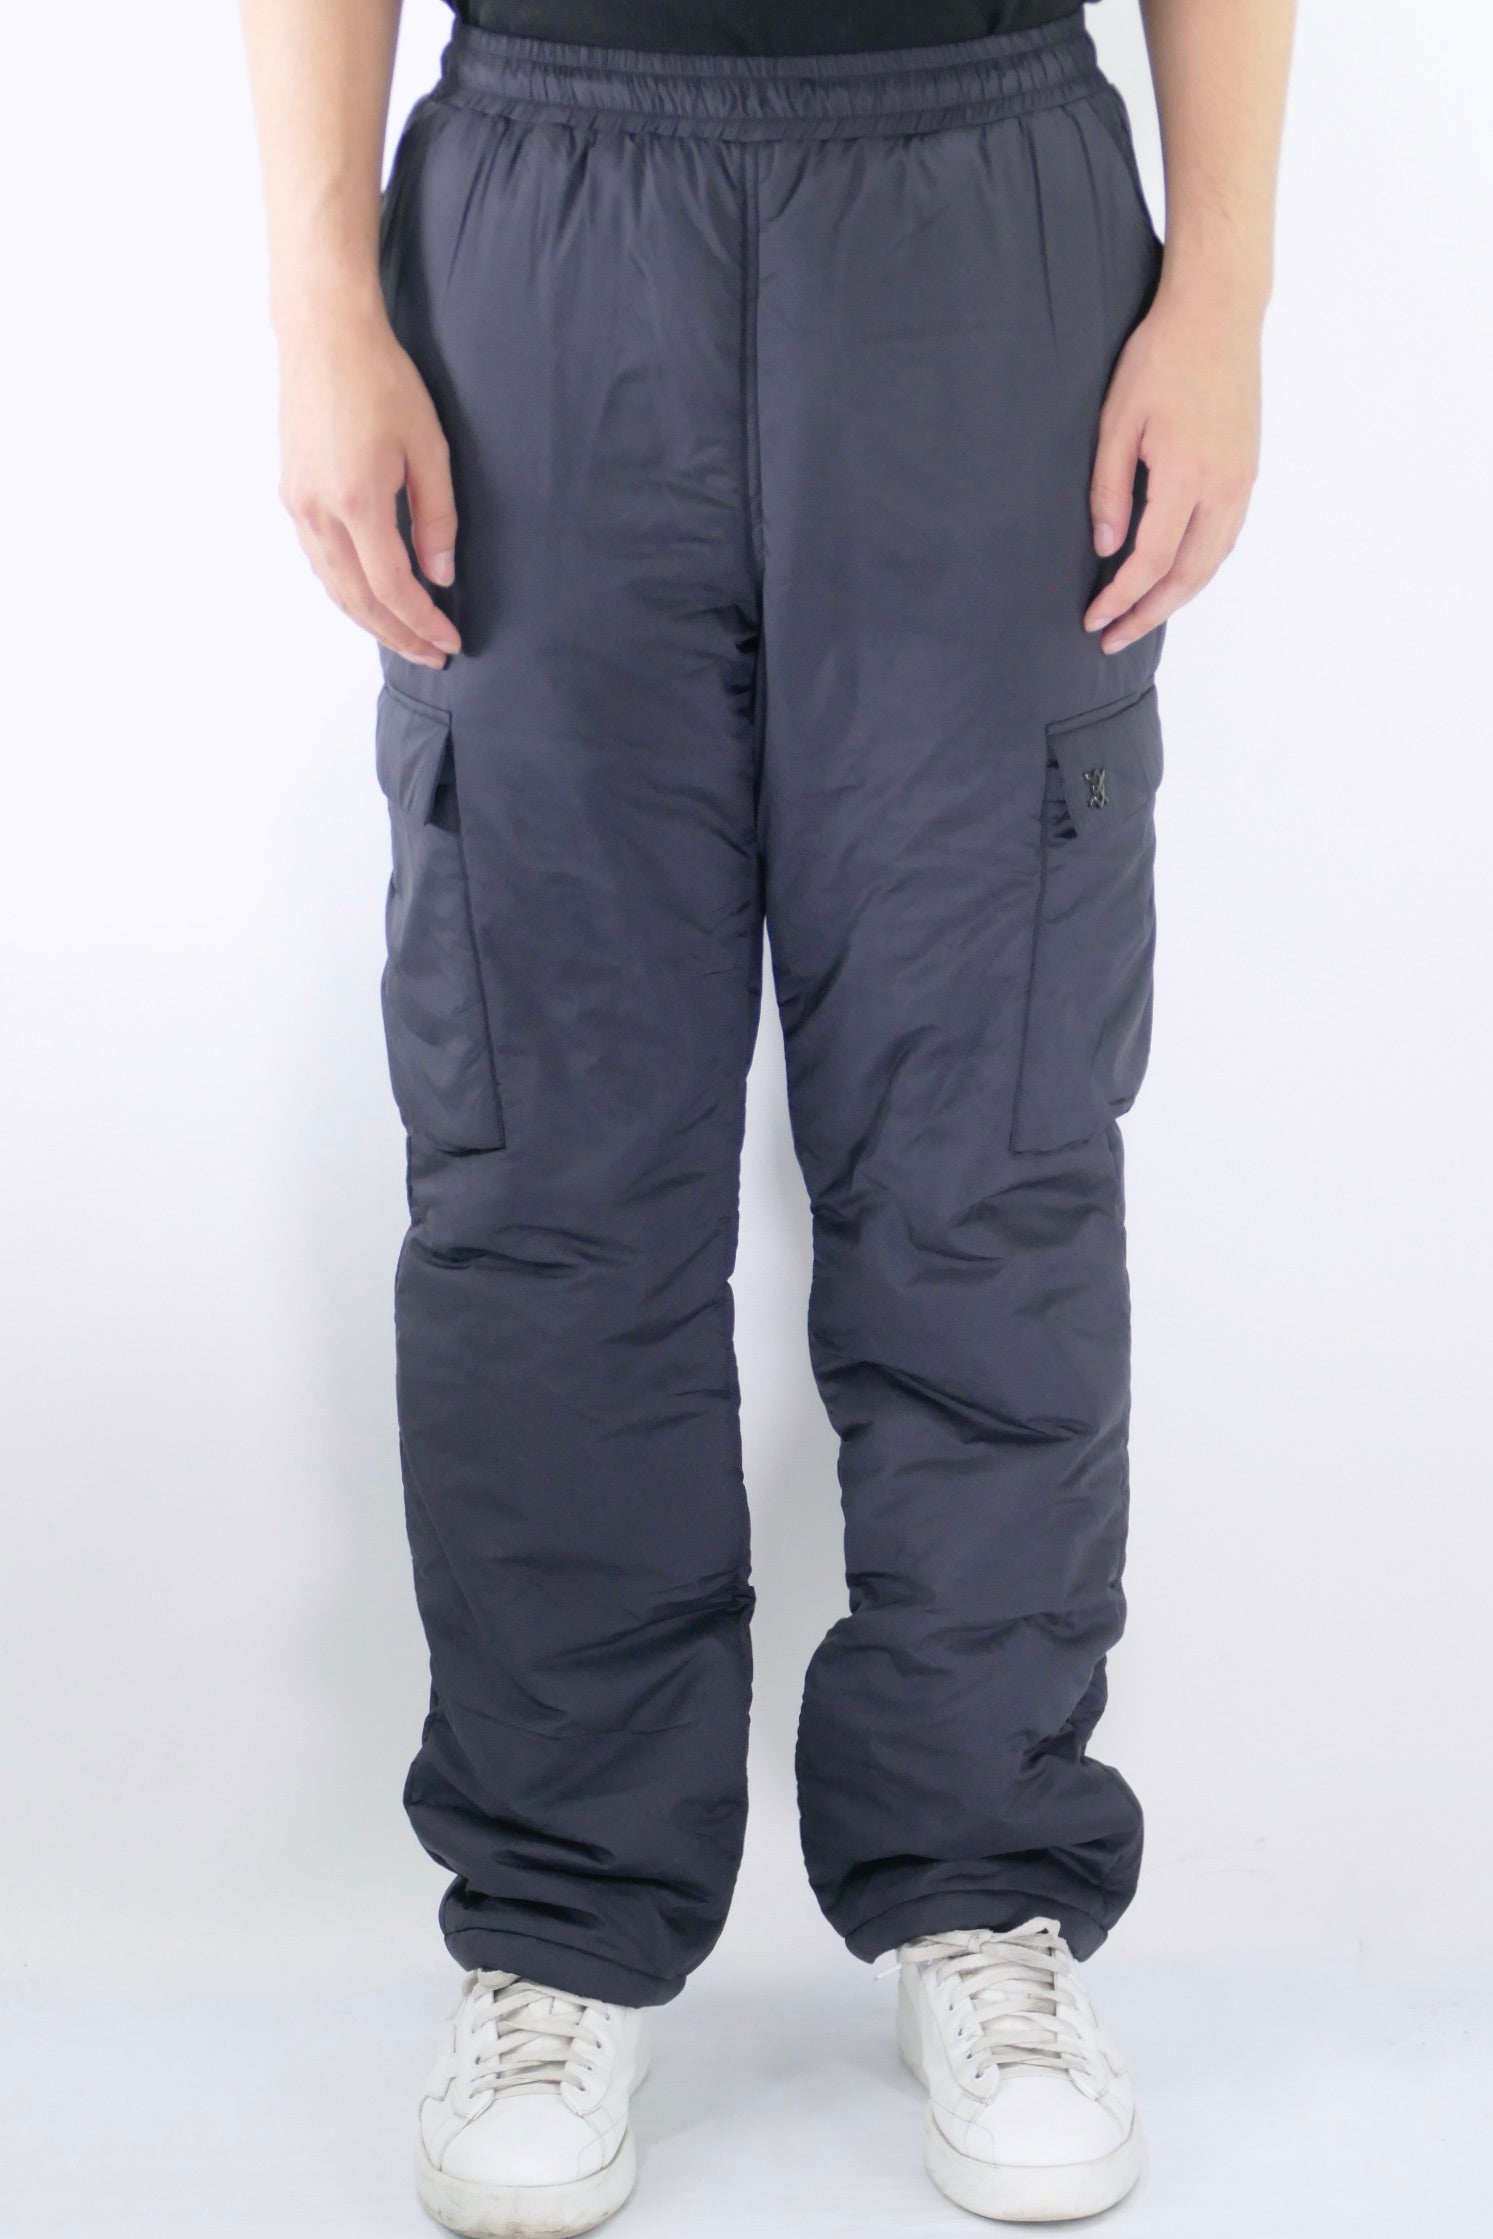 Daily Paper Rondre Padded Pants - Deep Navy